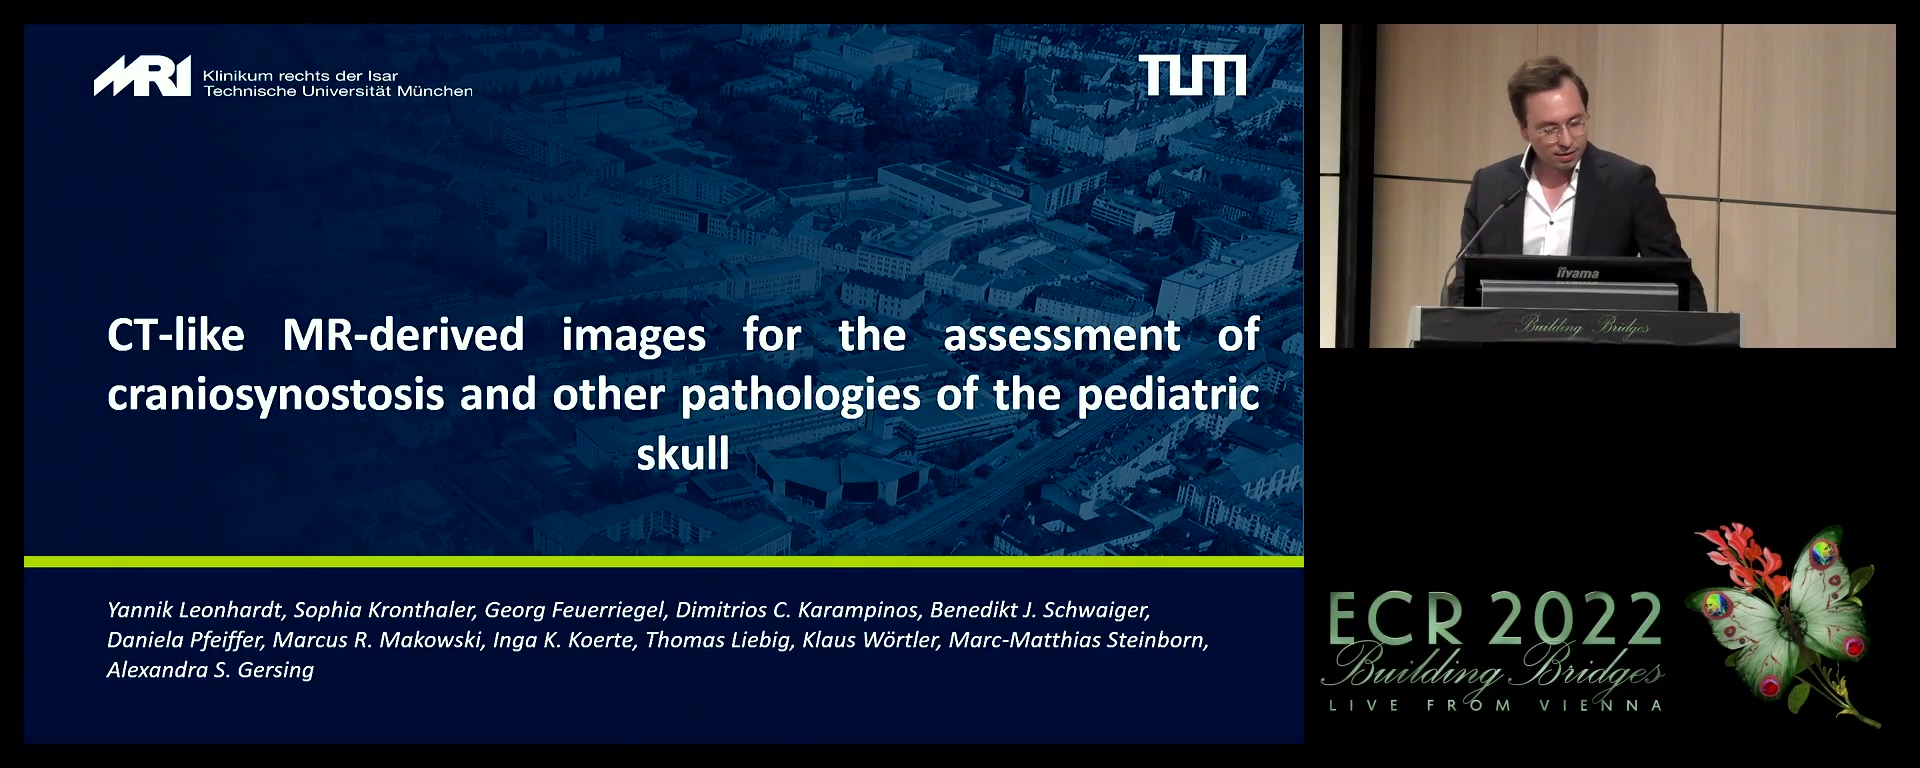 CT-like MR-derived images for the assessment of craniosynostosis and other pathologies of the paediatric skull